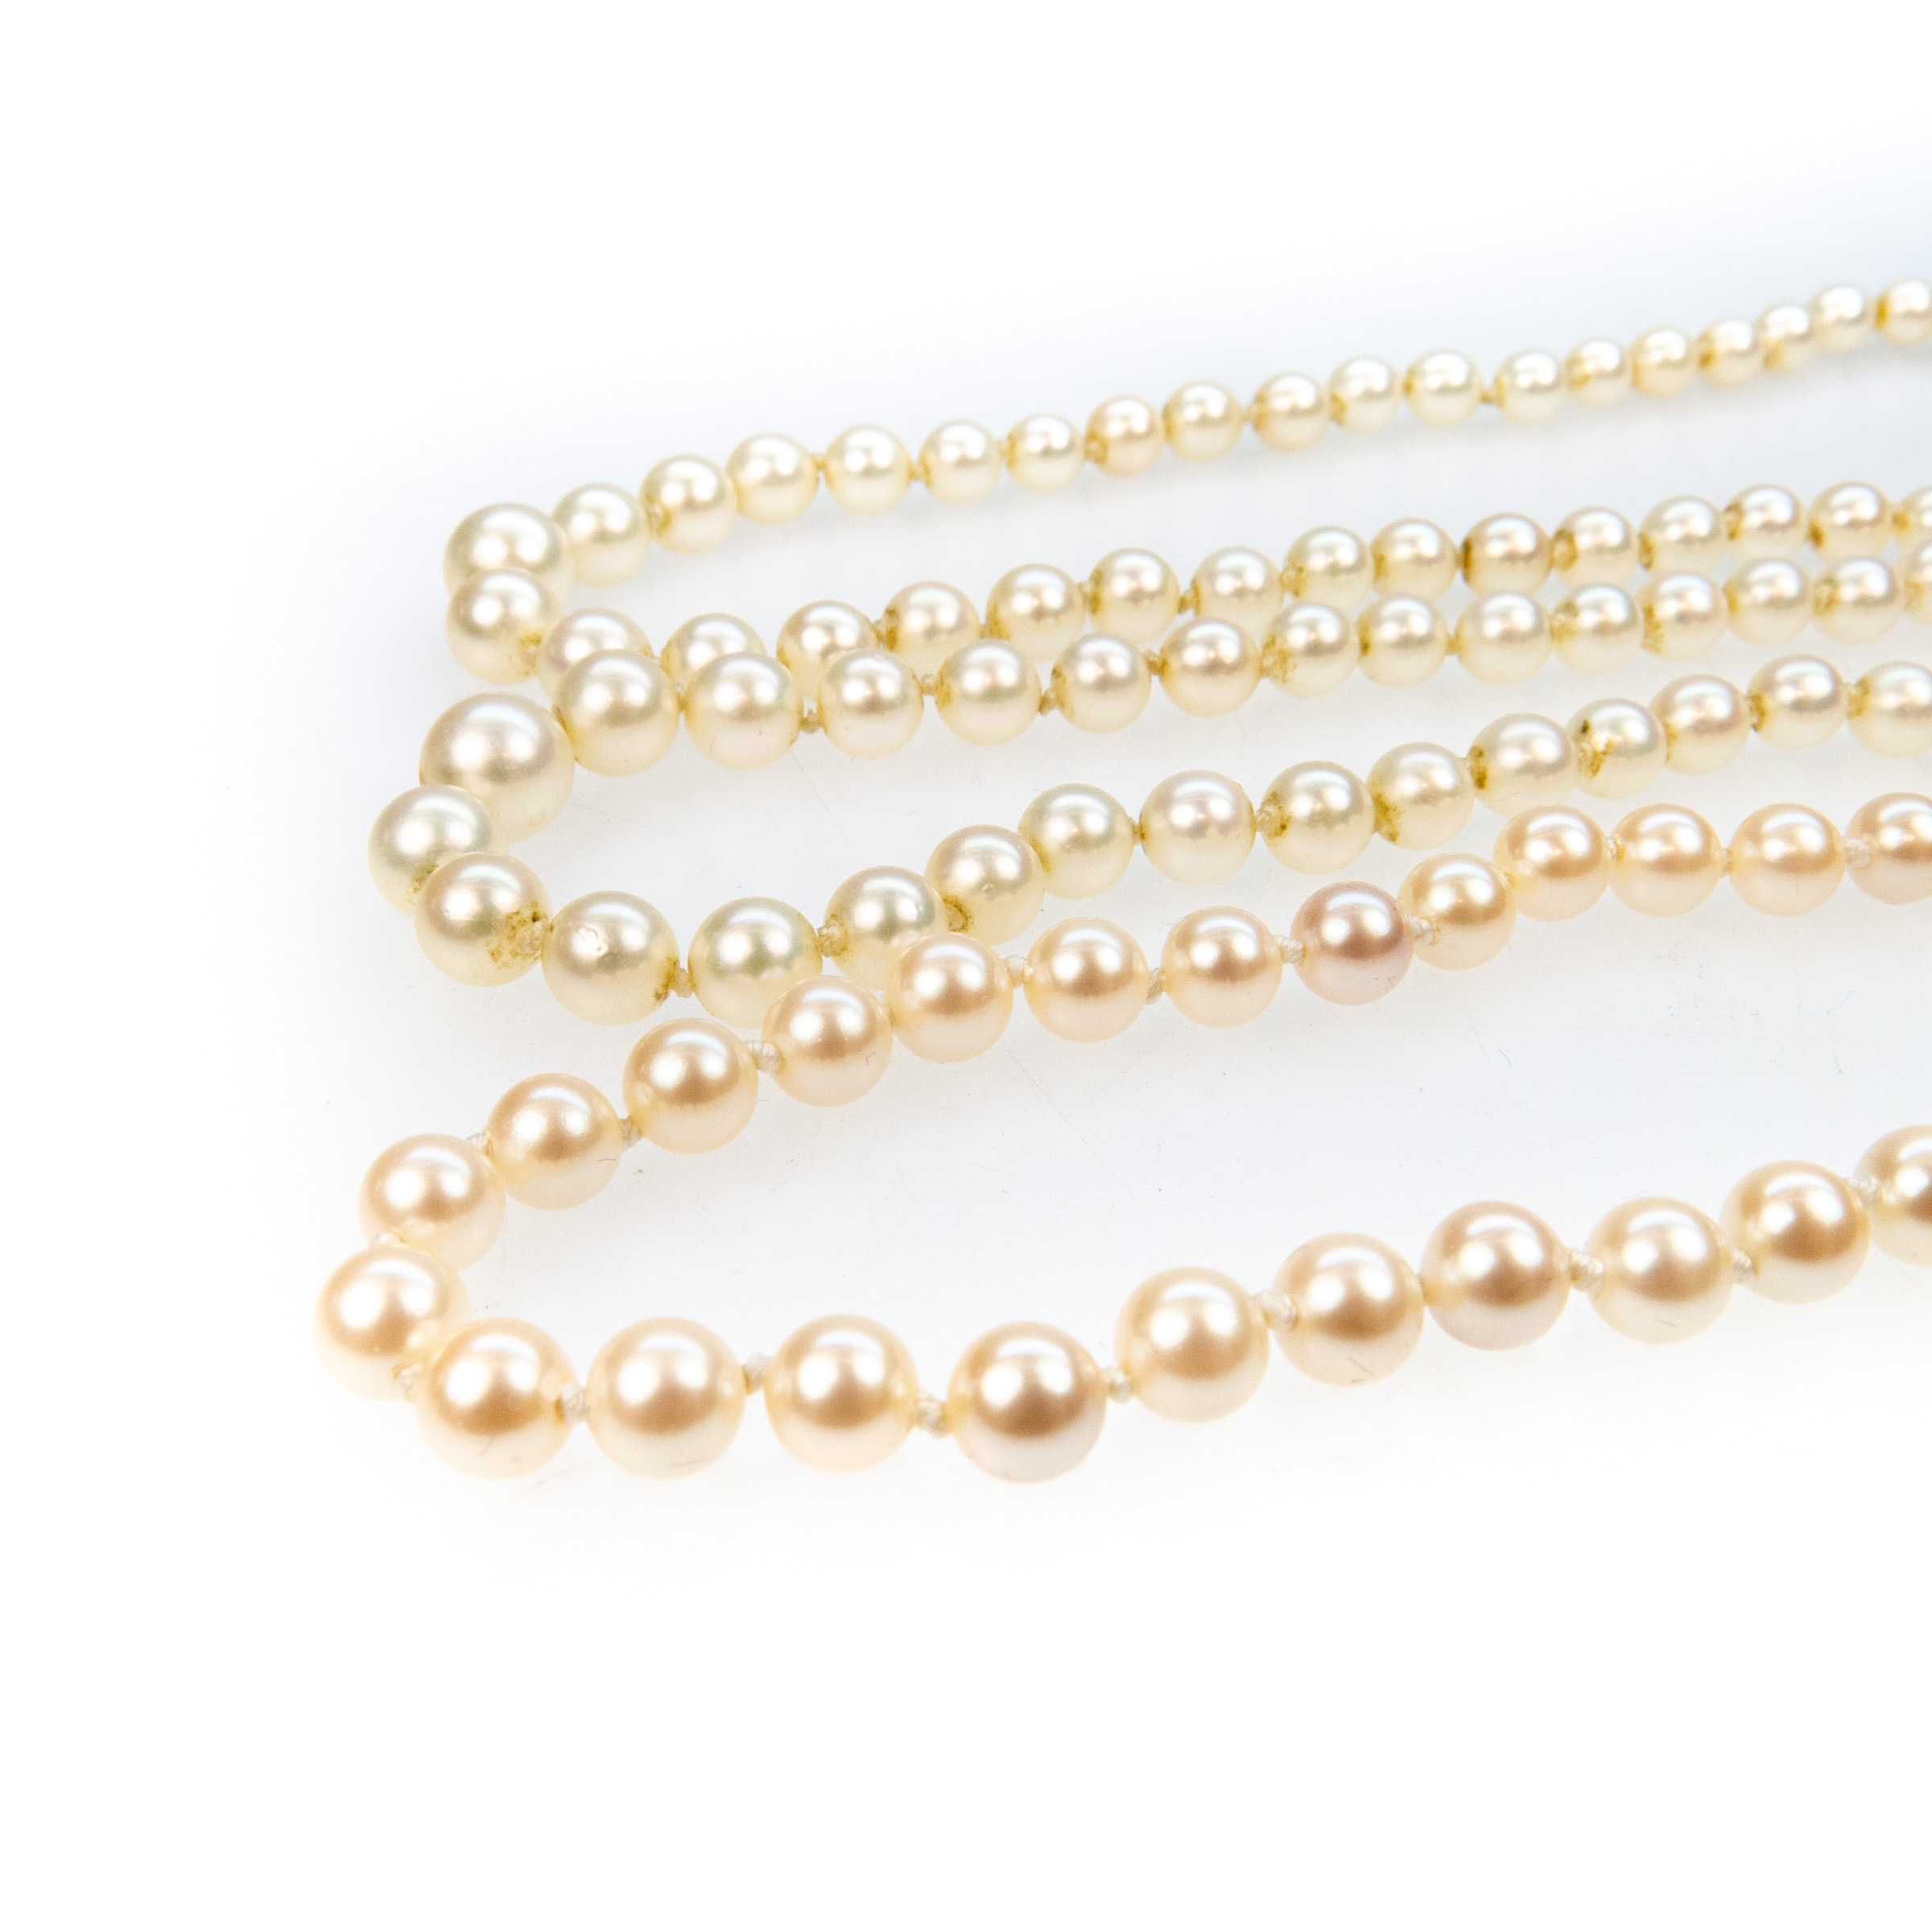 3 Single Strand Cultured Pearl Necklaces